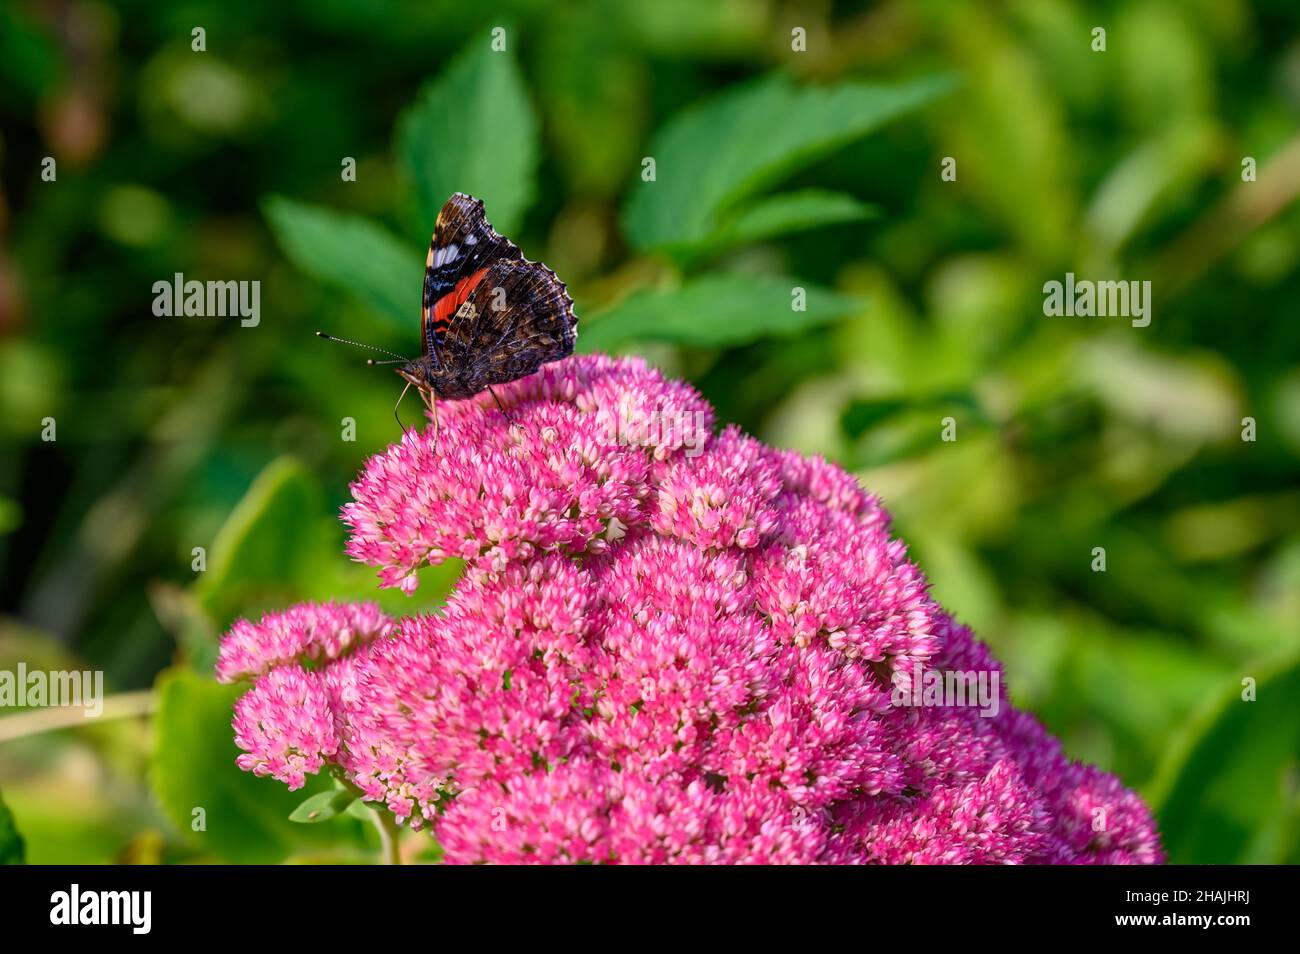 Sideways view of a Red Admiral (Vanessa atalanta) butterfly sitting on a pink Hylotelephium 'Herbstfreude' flower-head in Norfolk, England. Stock Photo